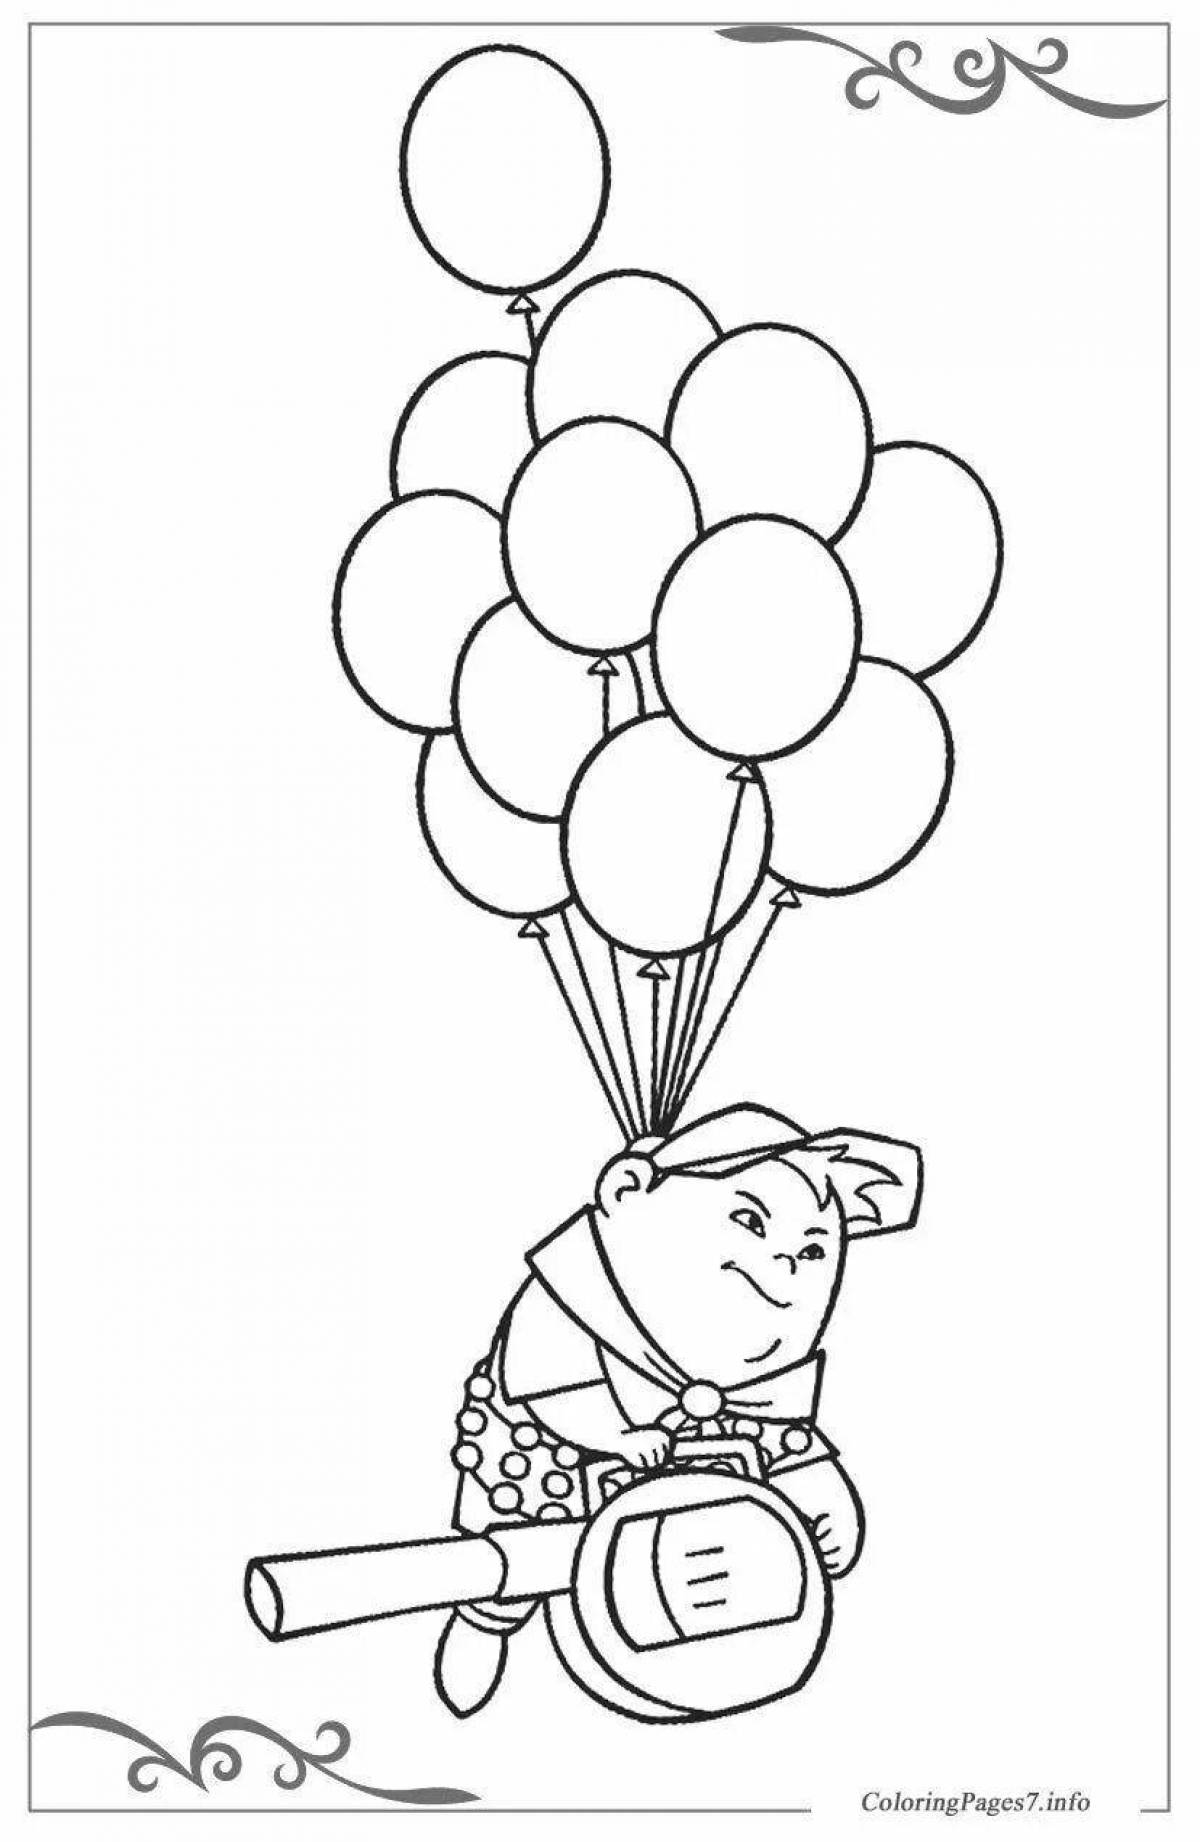 Bright coloring page up